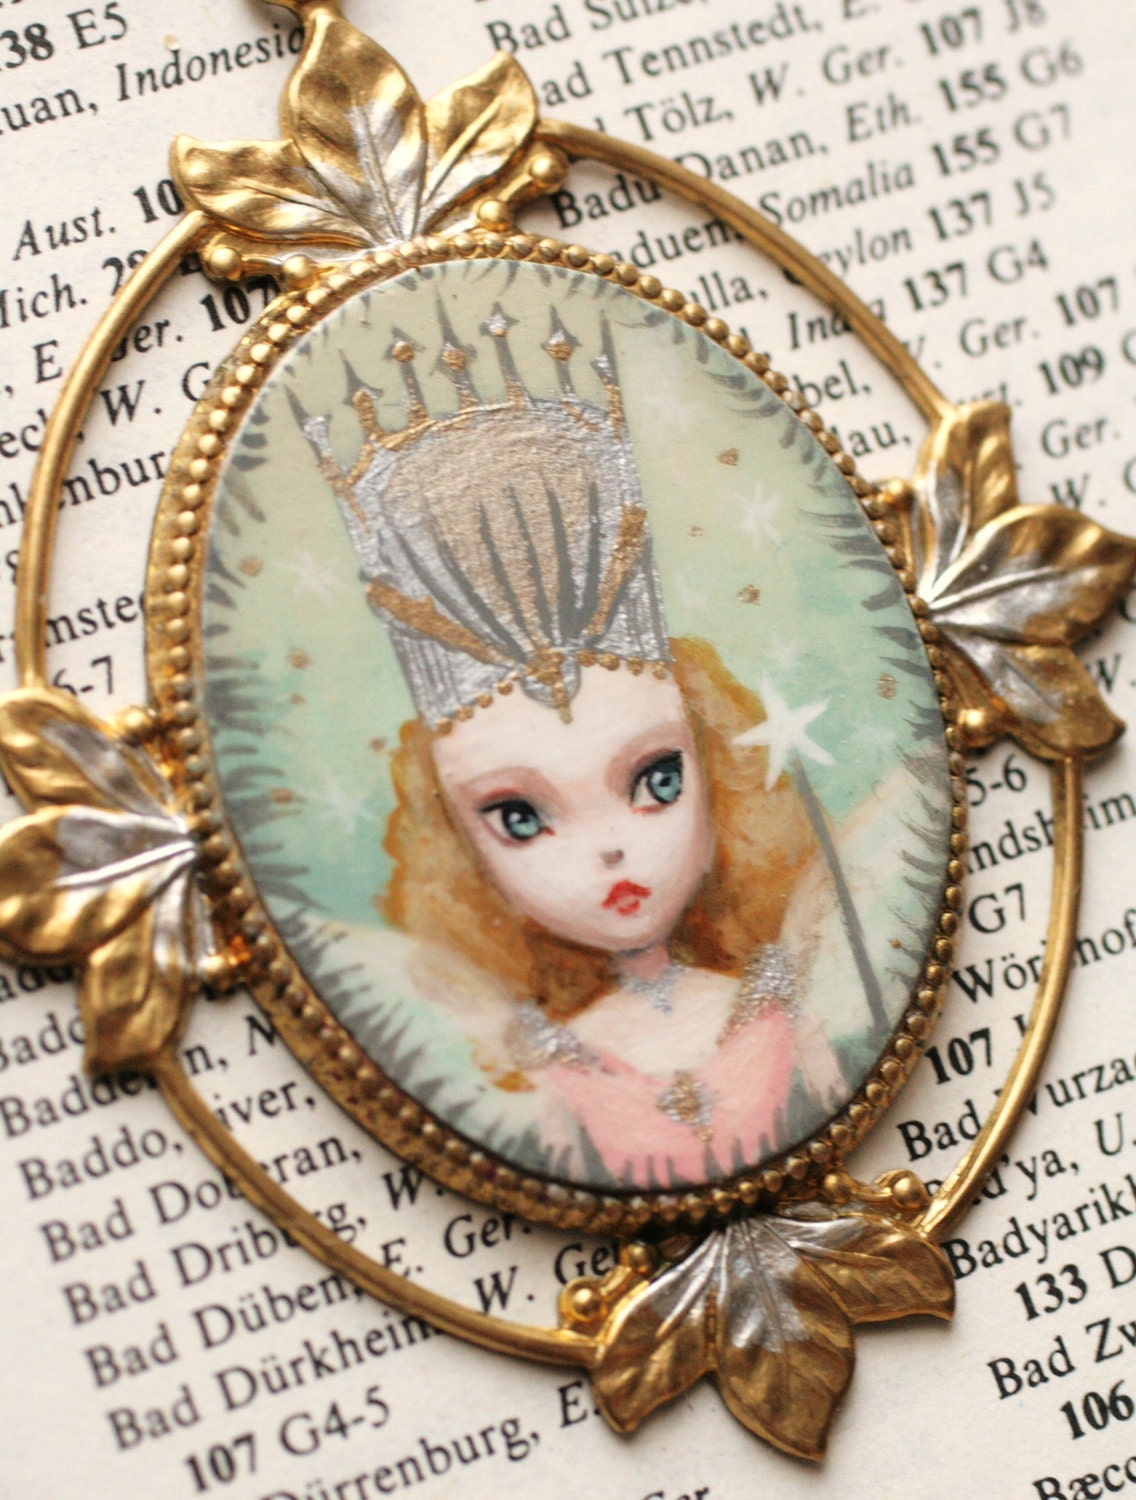 Reserved for purelush - Glinda of the East - from the Oz Collection - original cameo by Mab Graves